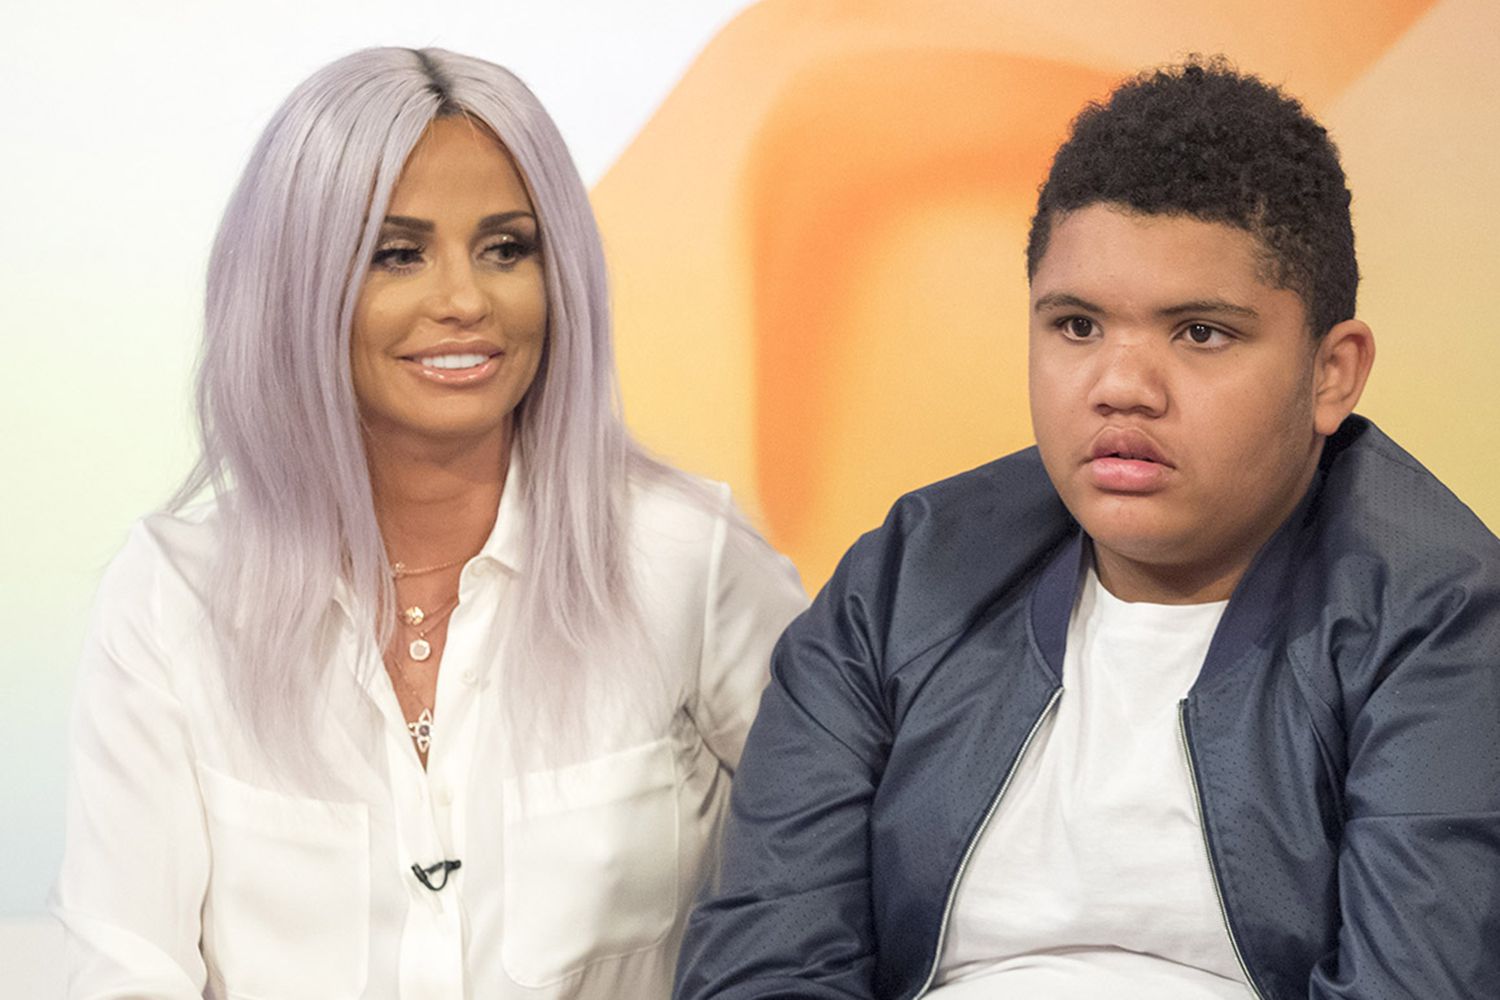 Katie Price Says She Has Made the Decision to Place 18-Year-Old Son Harvey in a Care Home Full-Time - Yahoo Entertainment